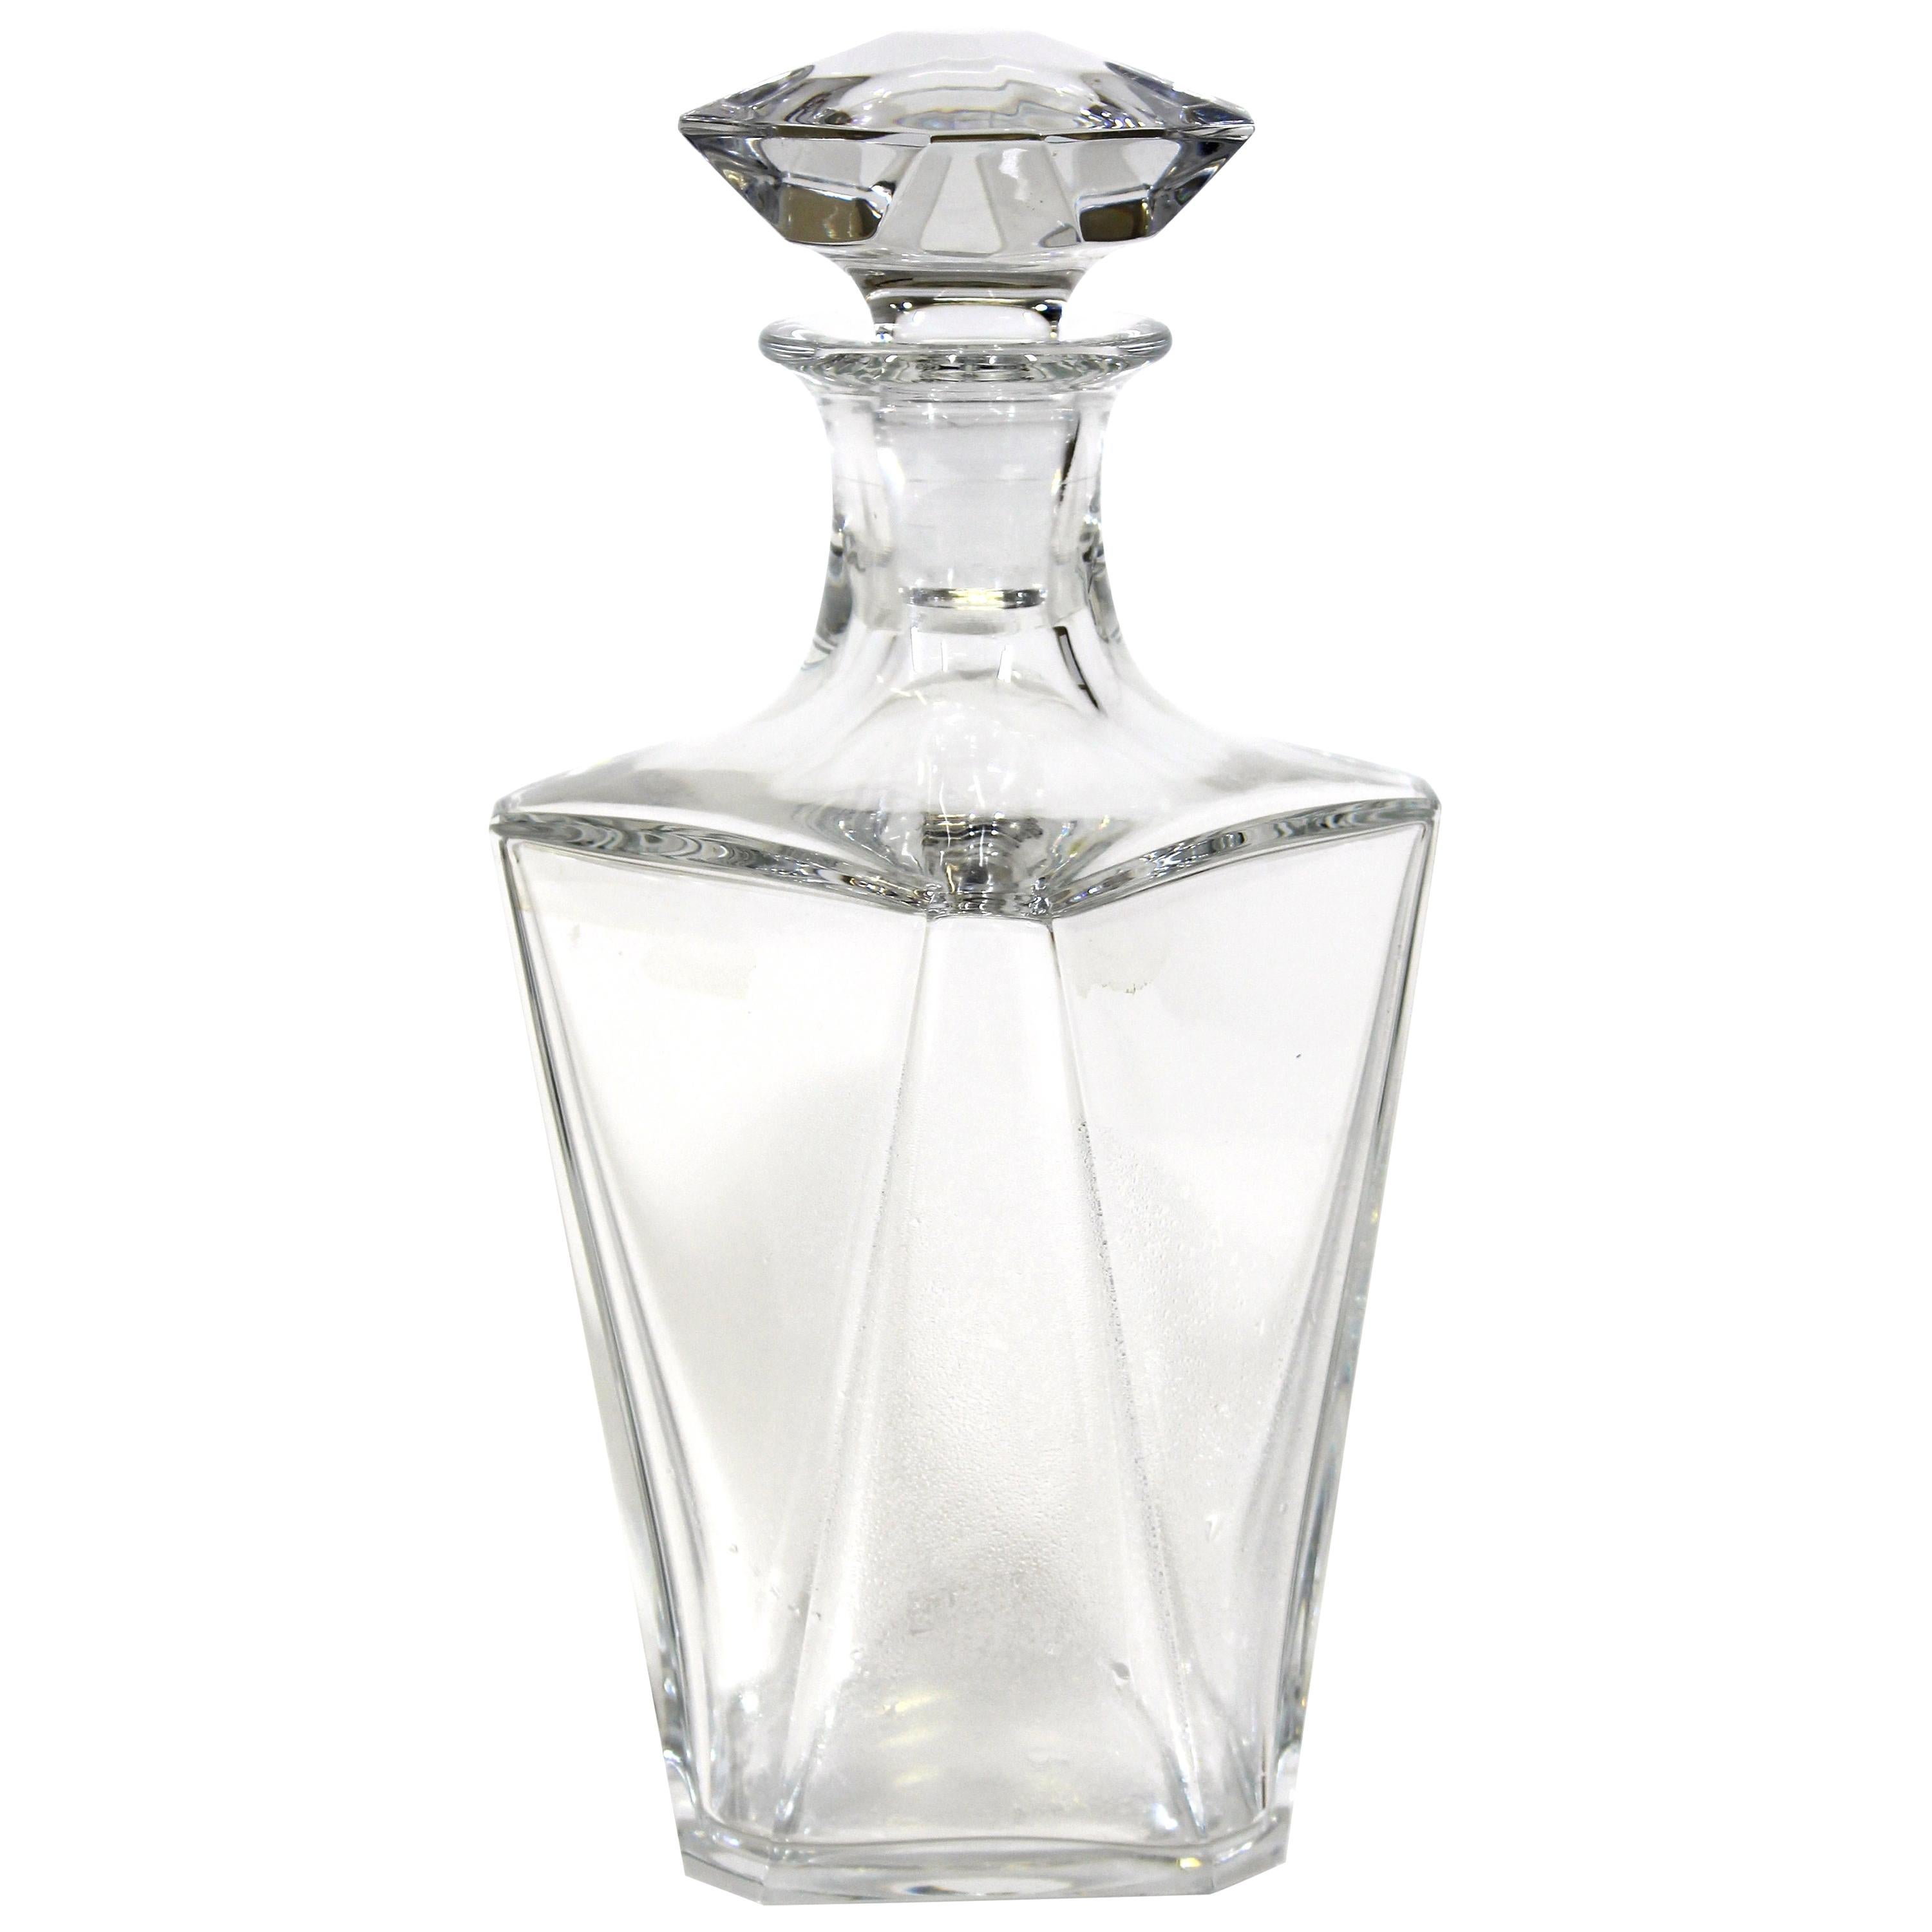 Baccarat 'Harcourt' French Crystal Decanter